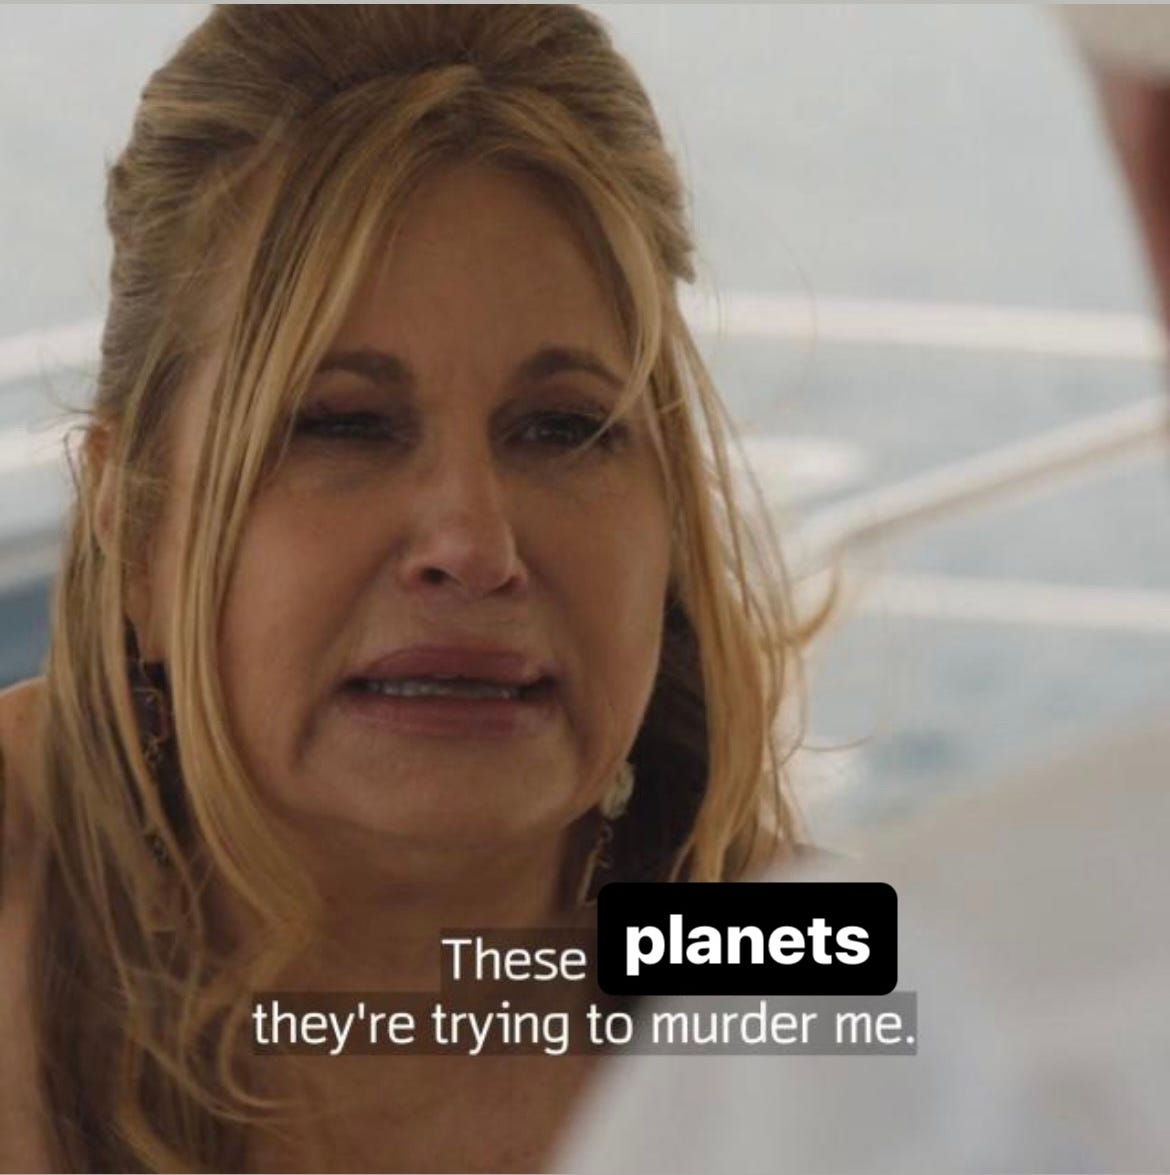 Jennifer Coolidge in The White Lotus screenshot, edited to read "These 'planets', they're trying to murder me."